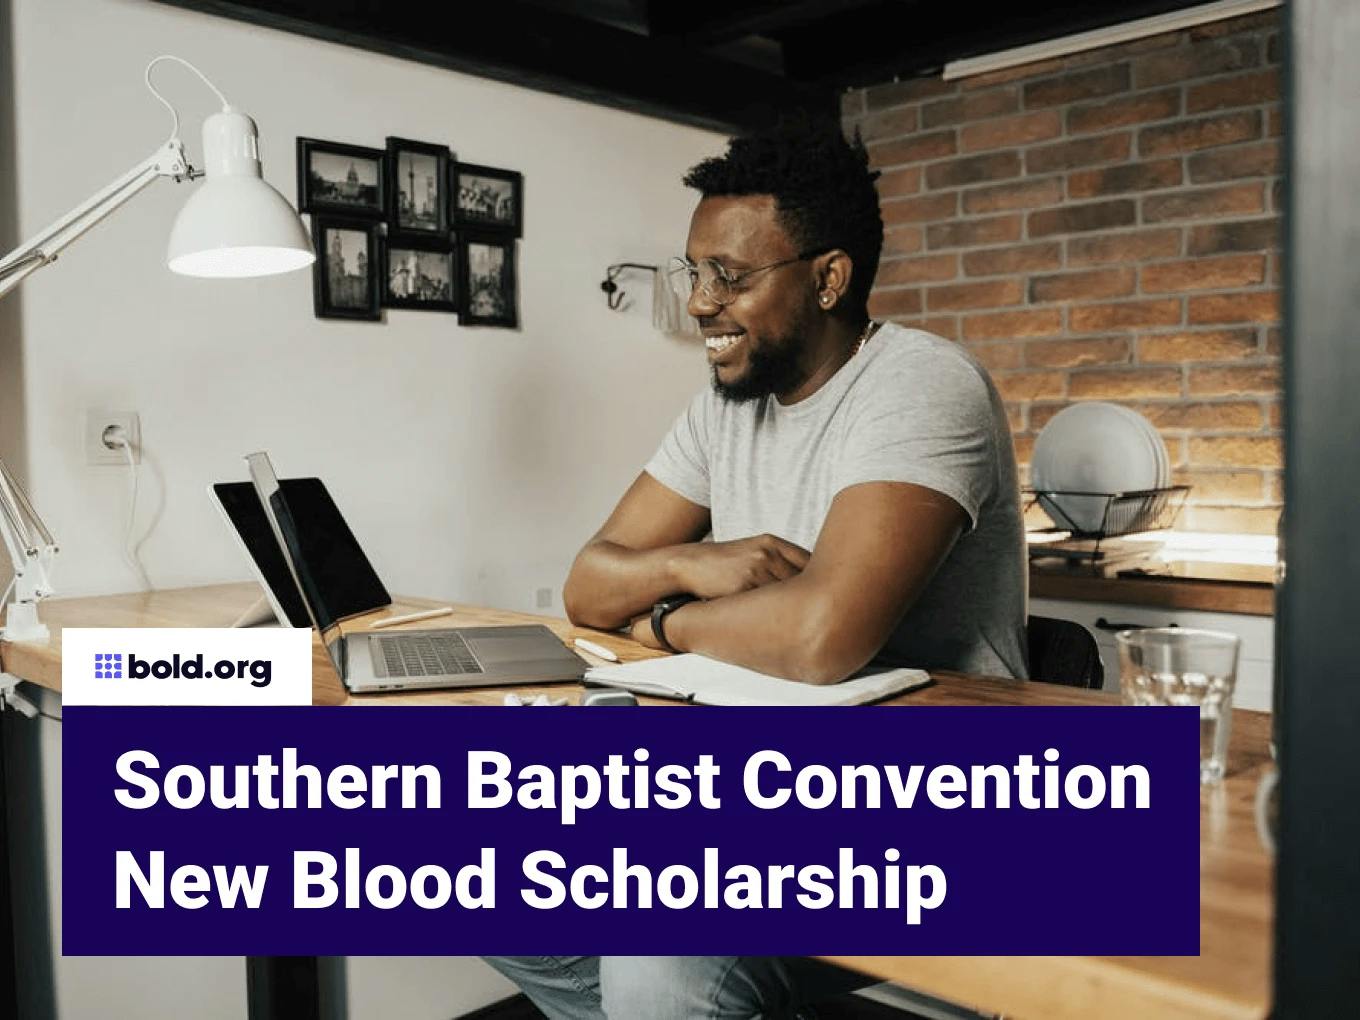 Southern Baptist Convention New Blood Scholarship